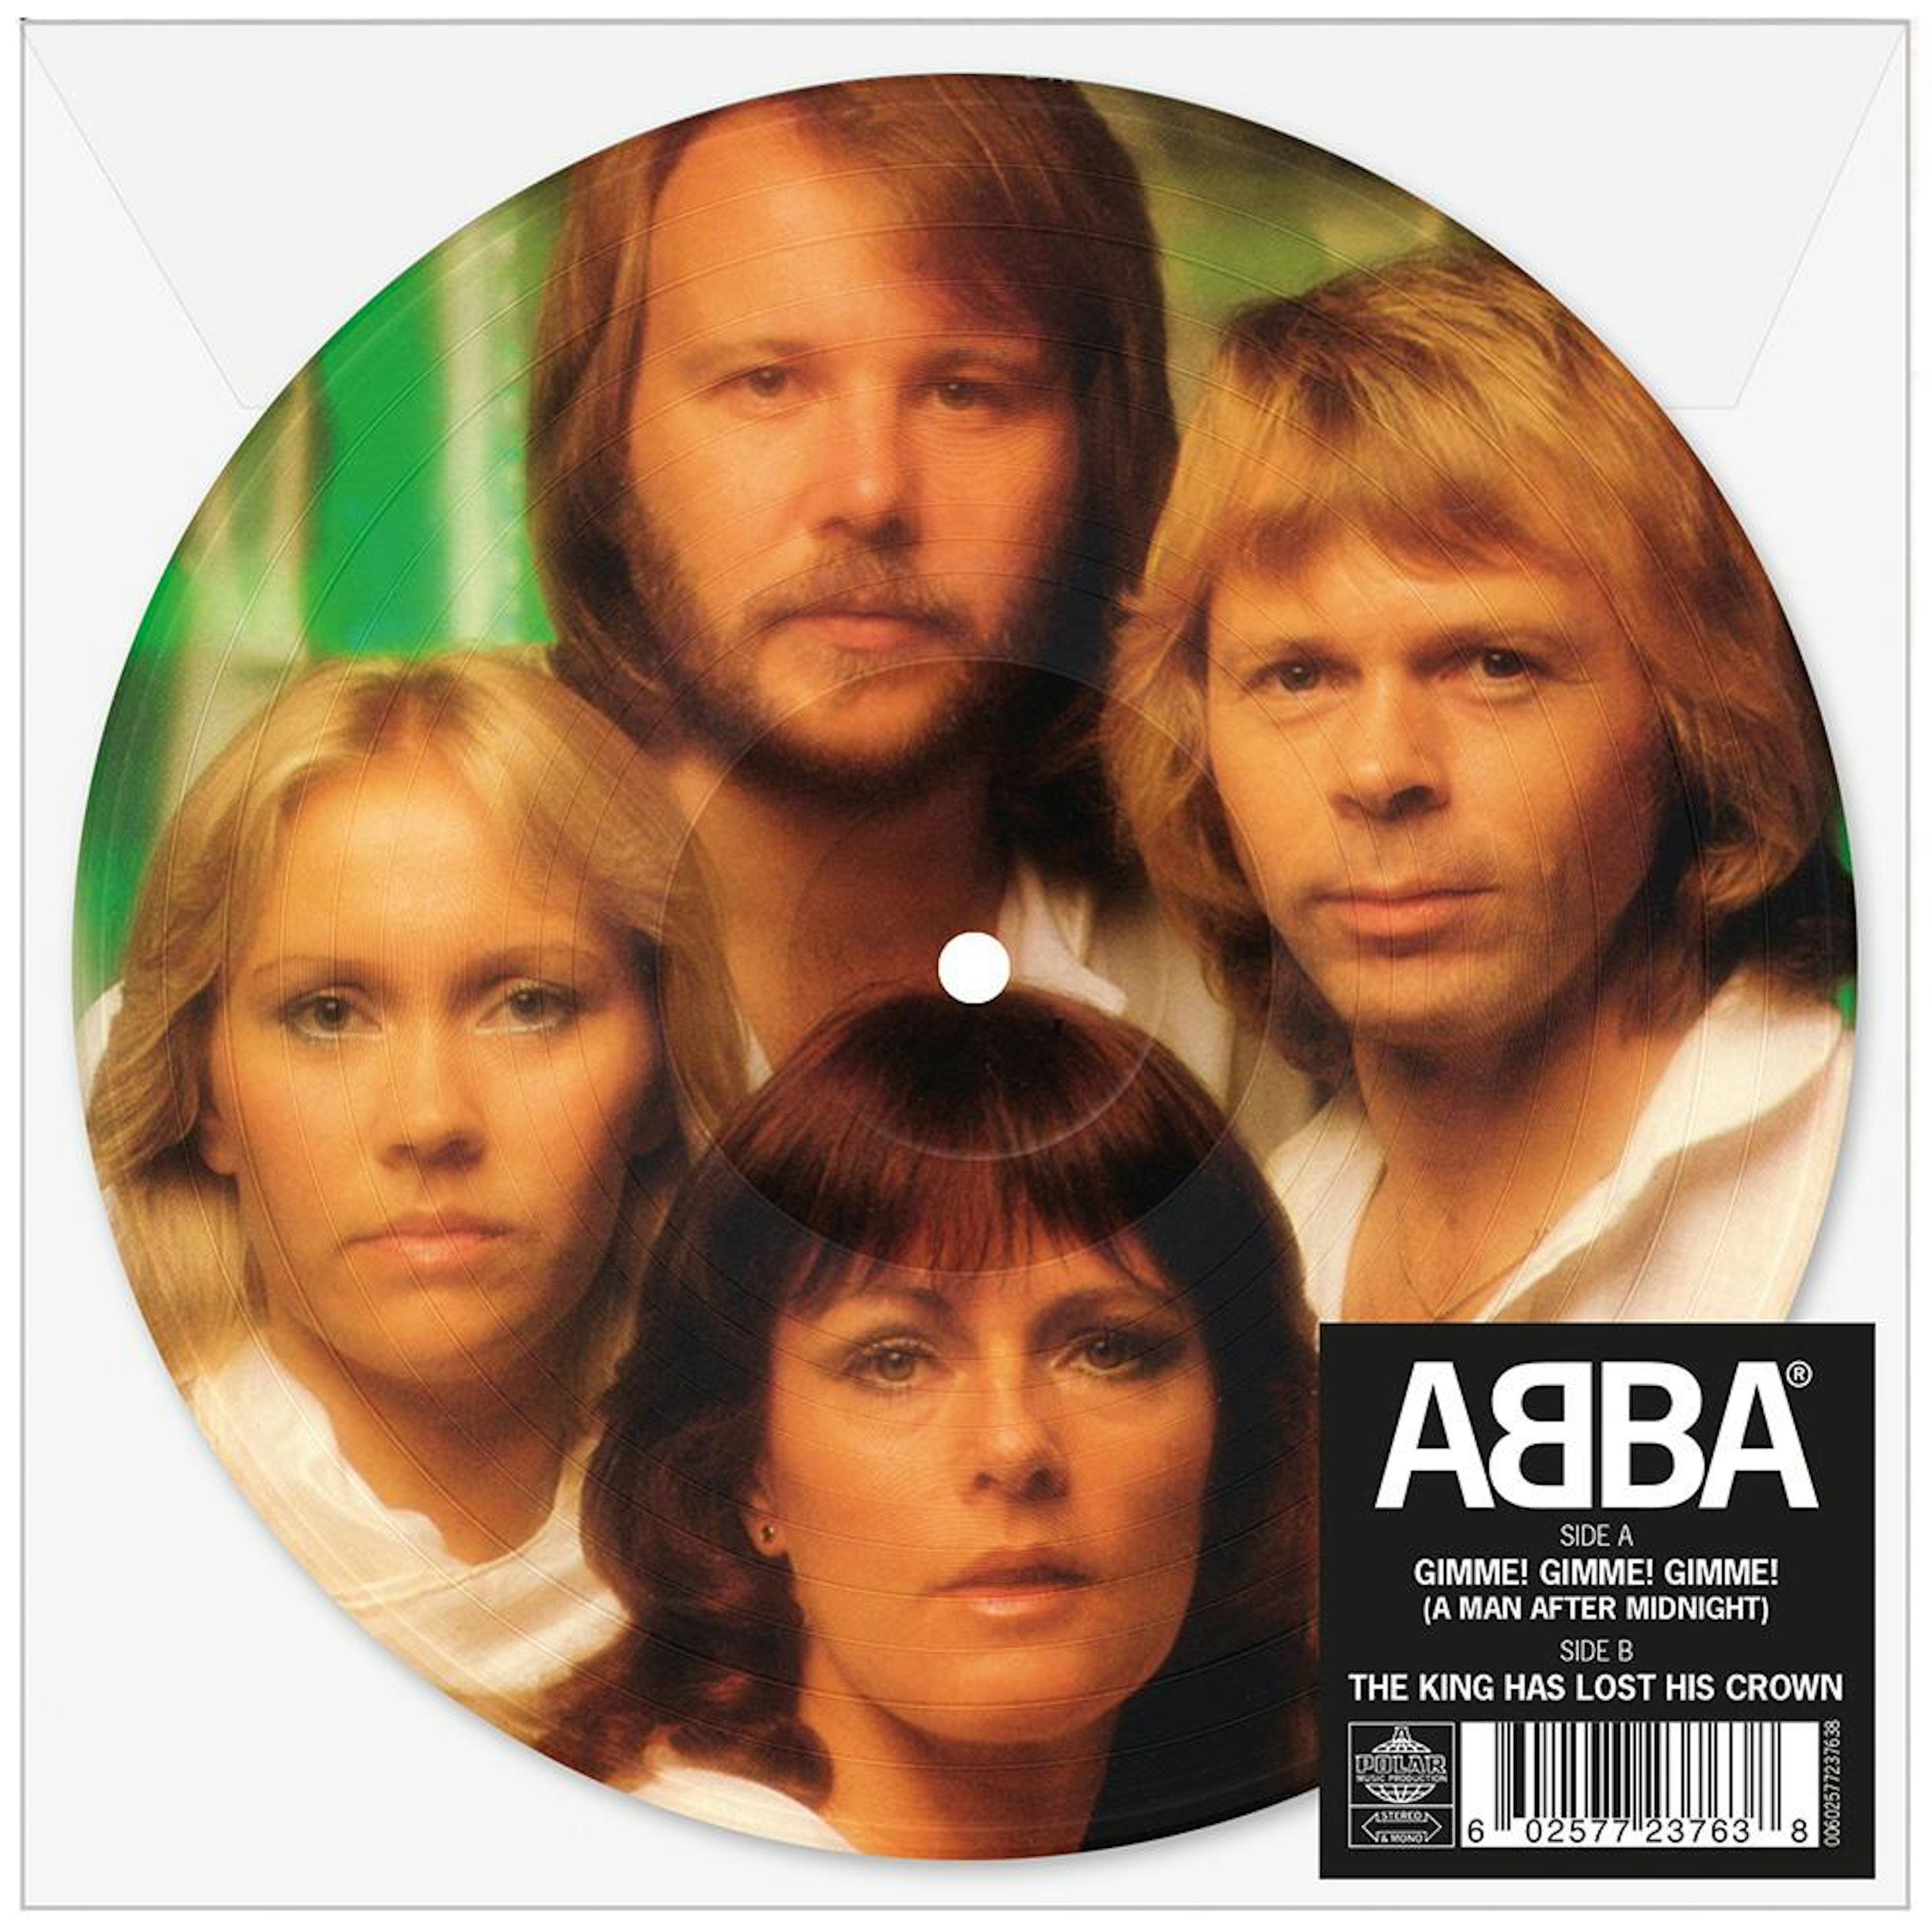 Abba gimme gimme gimme a man. ABBA album Gimme. ABBA the King has Lost his Crown. Gimme Gimme Gimme a man after Midnight. Абба Gimme Gimme Gimme.